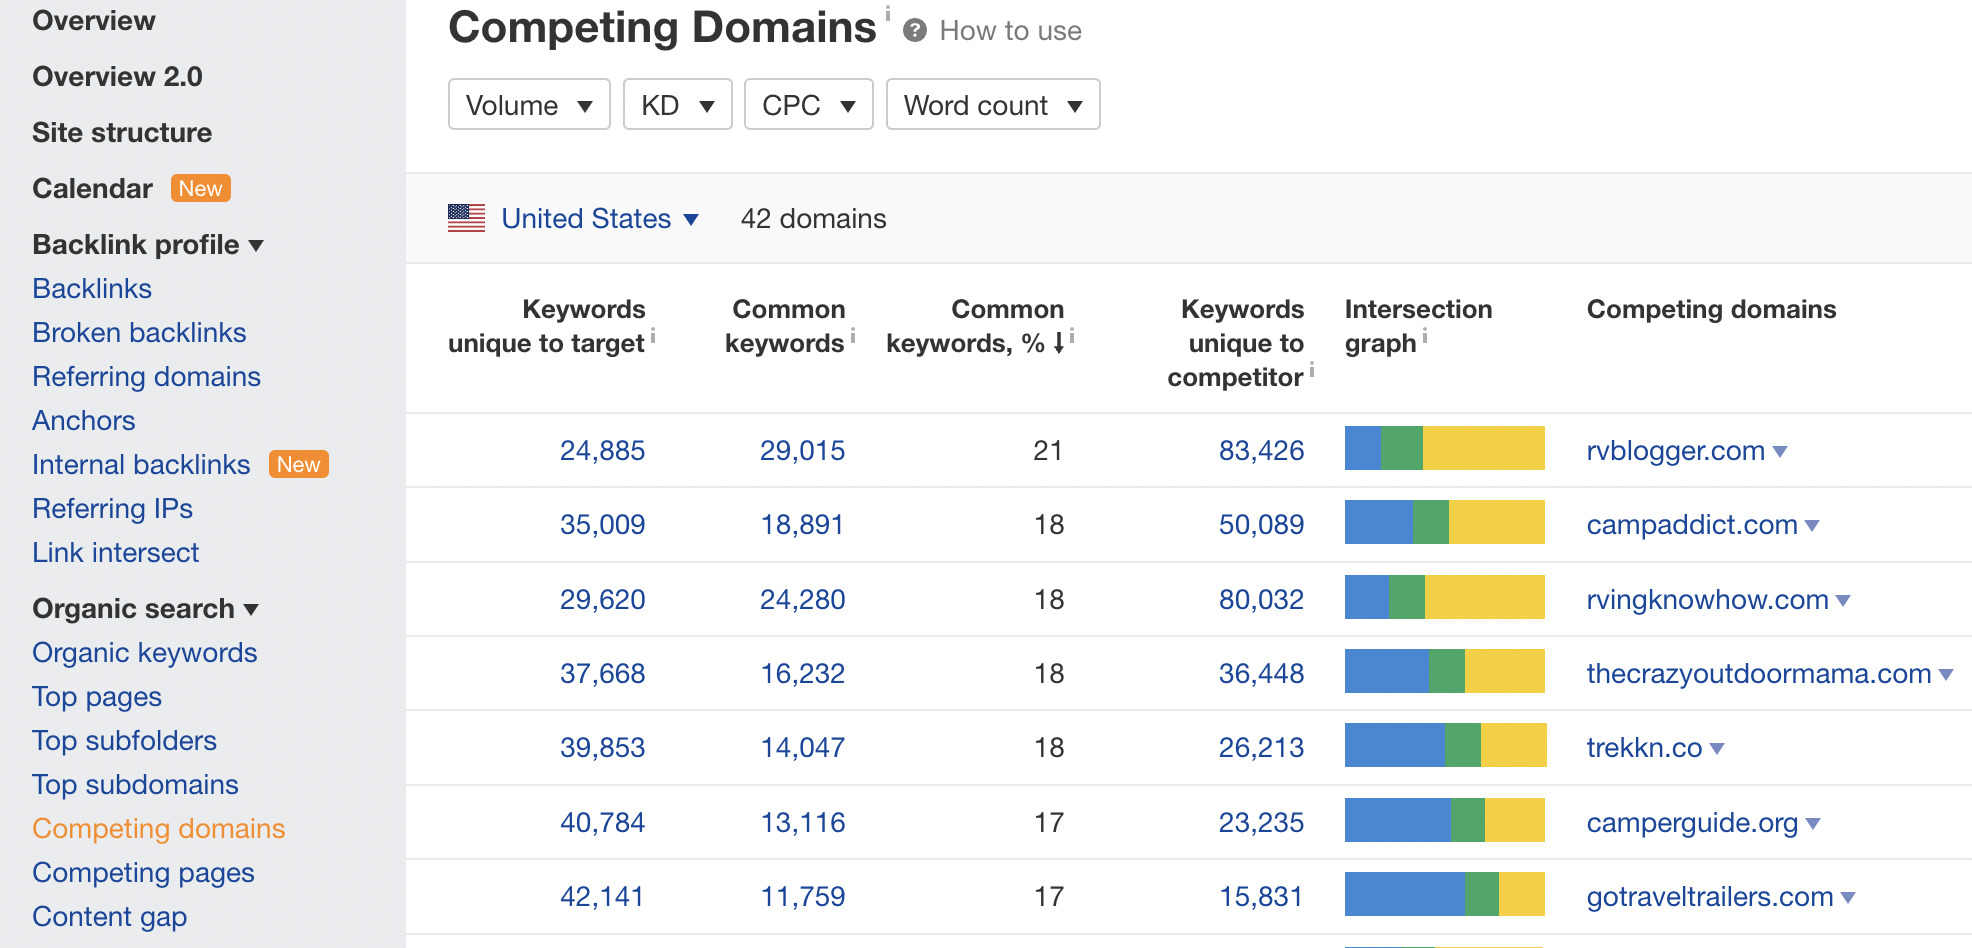 Ahrefs' Competing Domains report